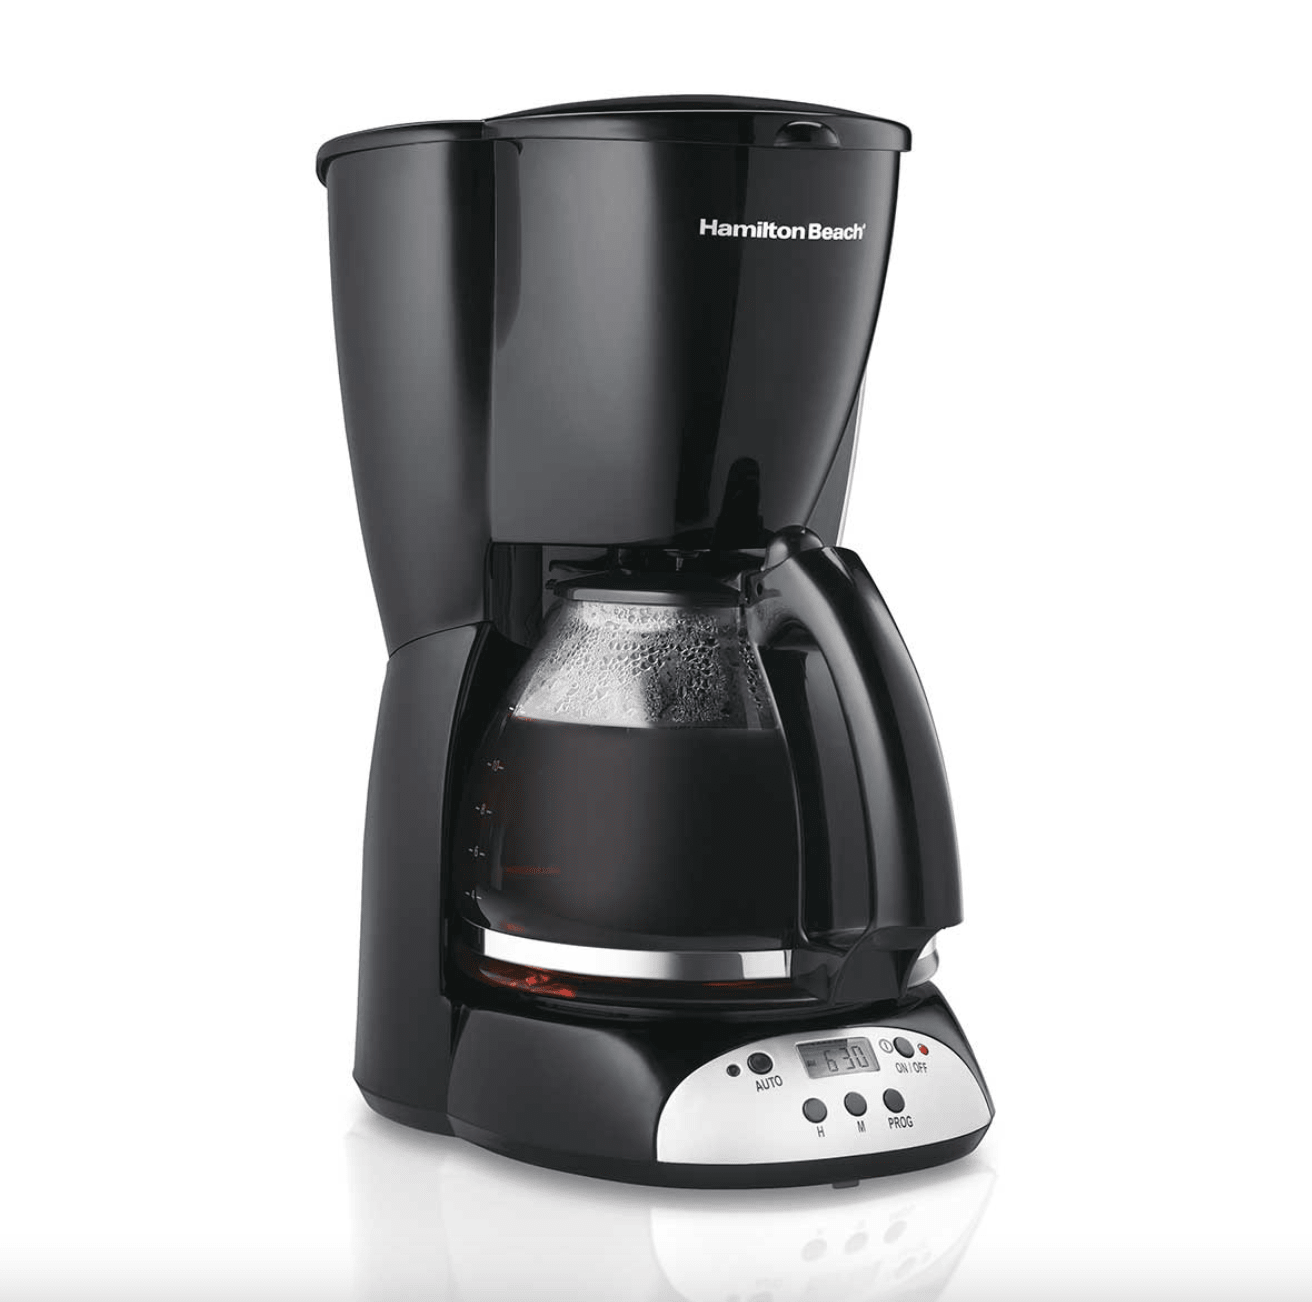 Mr. Coffee Occasions Coffee and Espresso System 2092271 Coffee Maker Review  - Consumer Reports